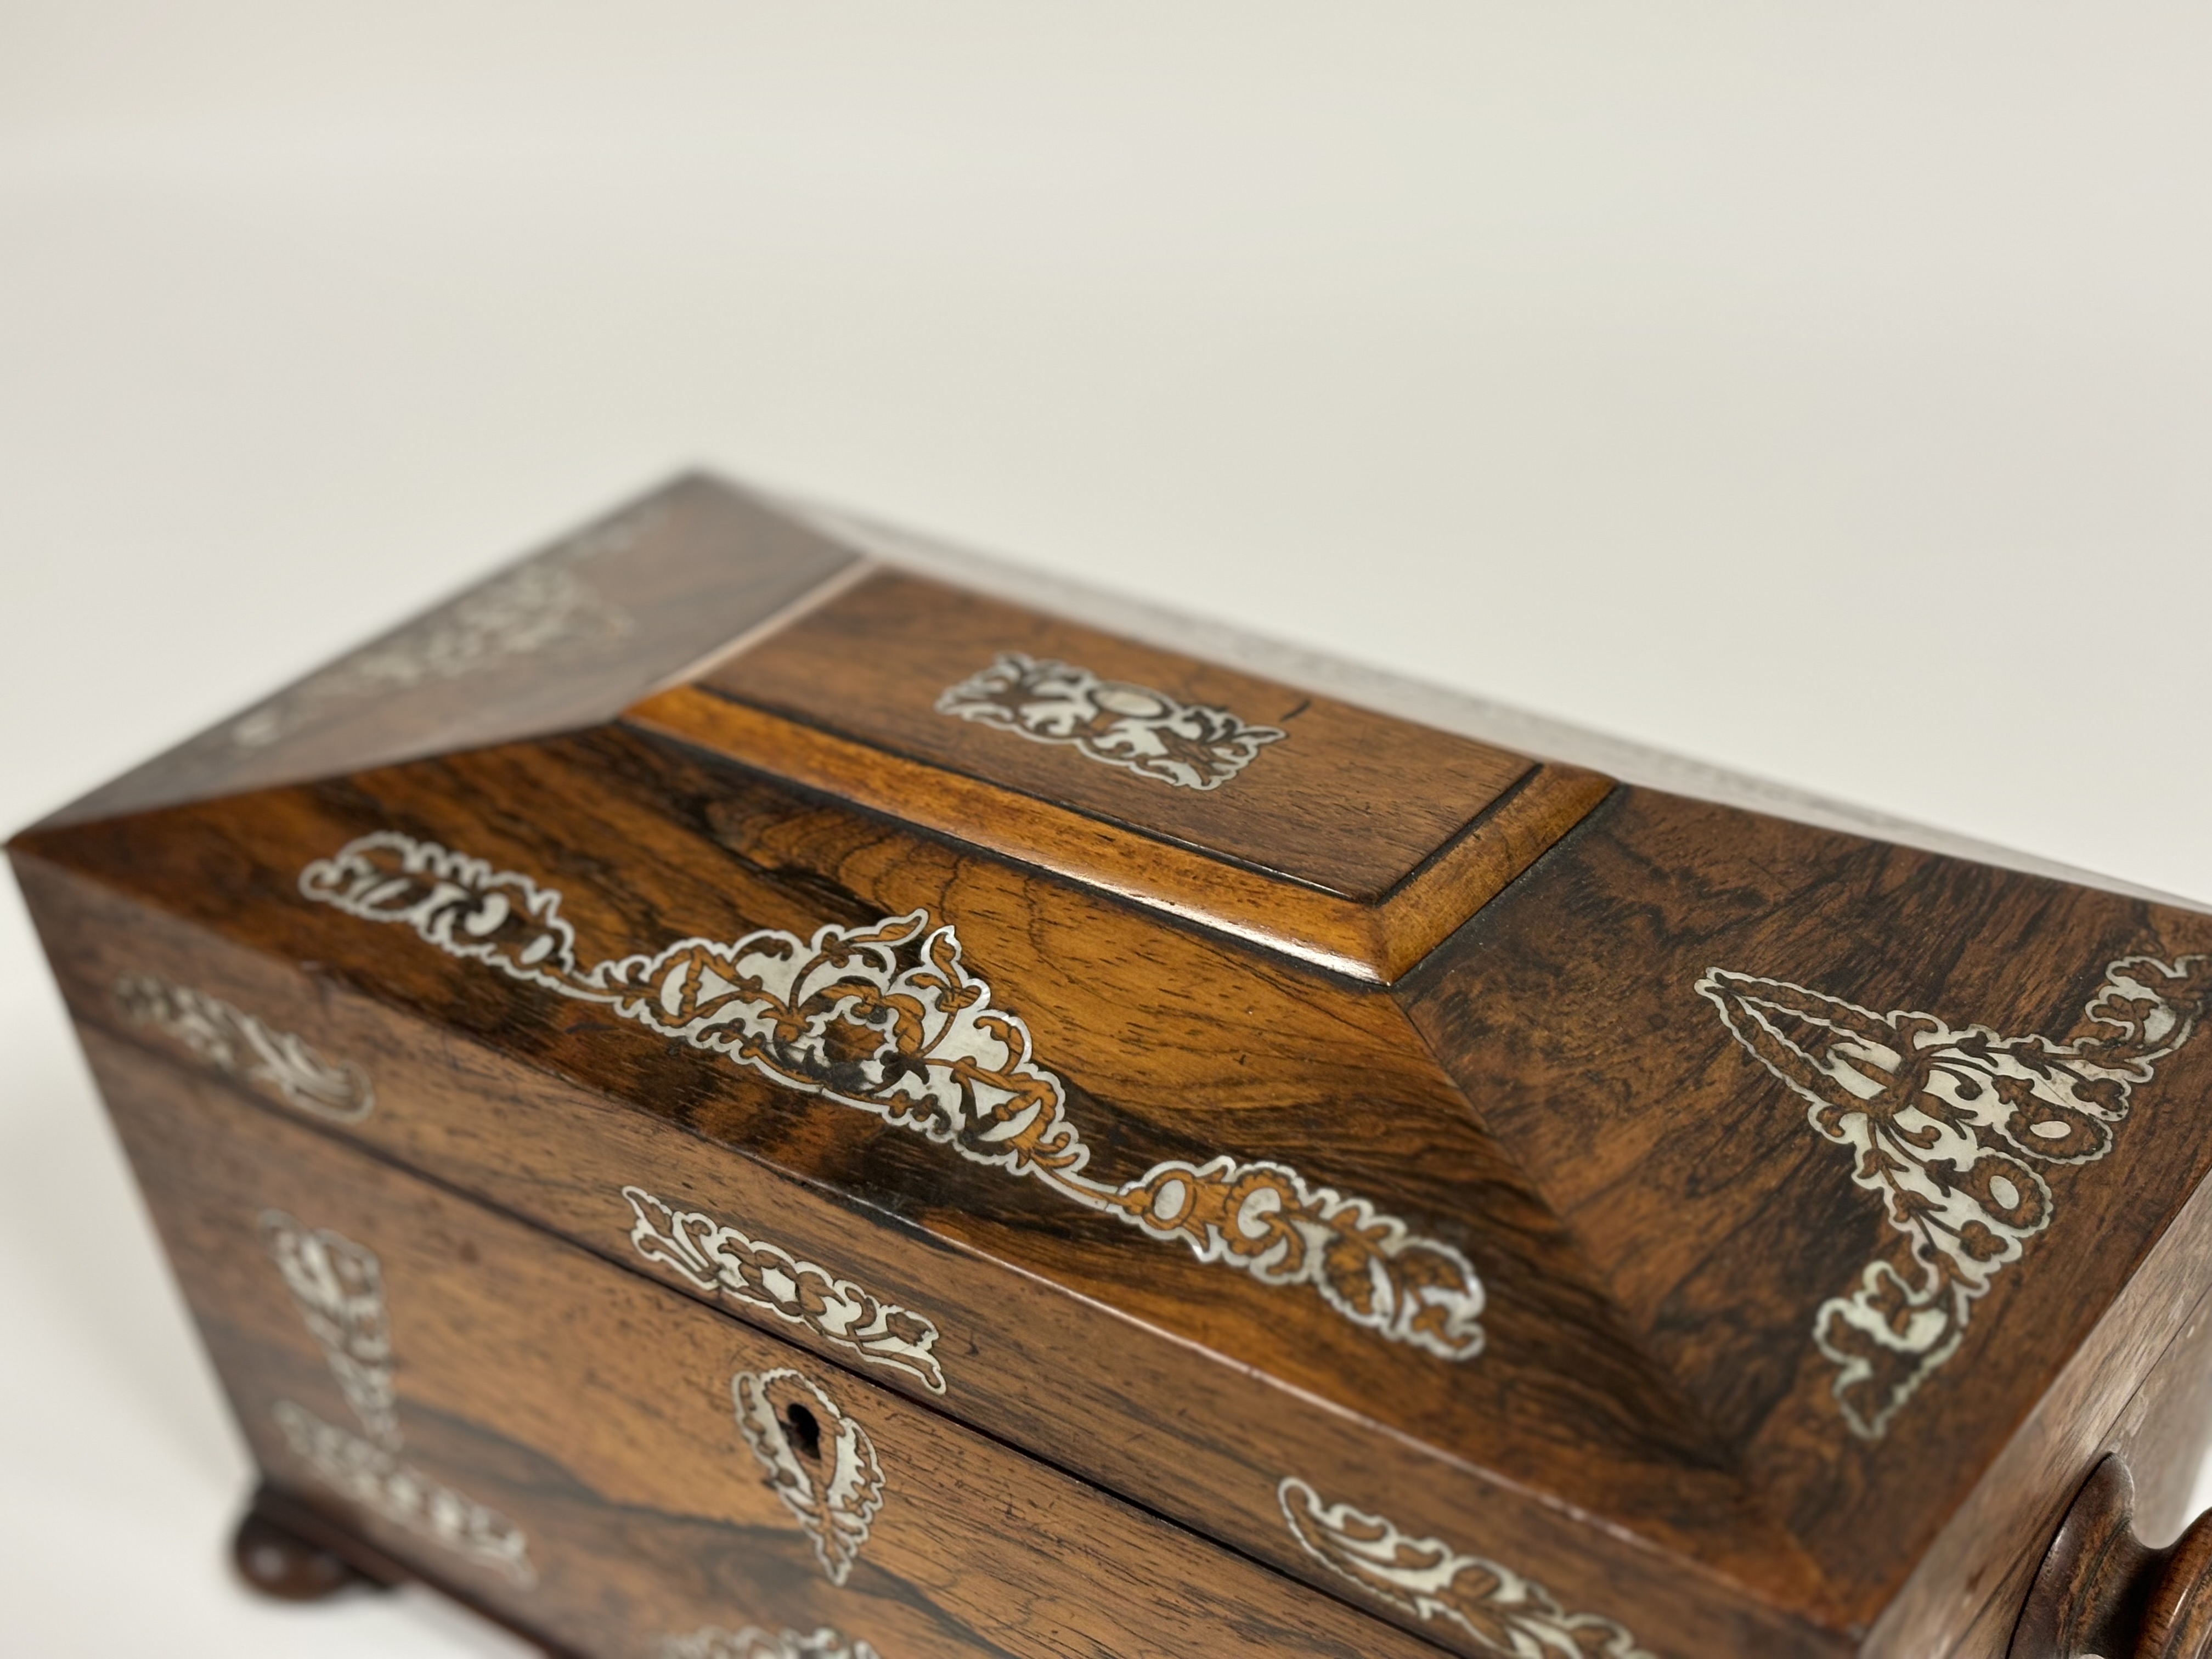 A William IV mother-of-pearl inlaid rosewood tea caddy, of sarcophagus shape, with turned handles - Image 8 of 8